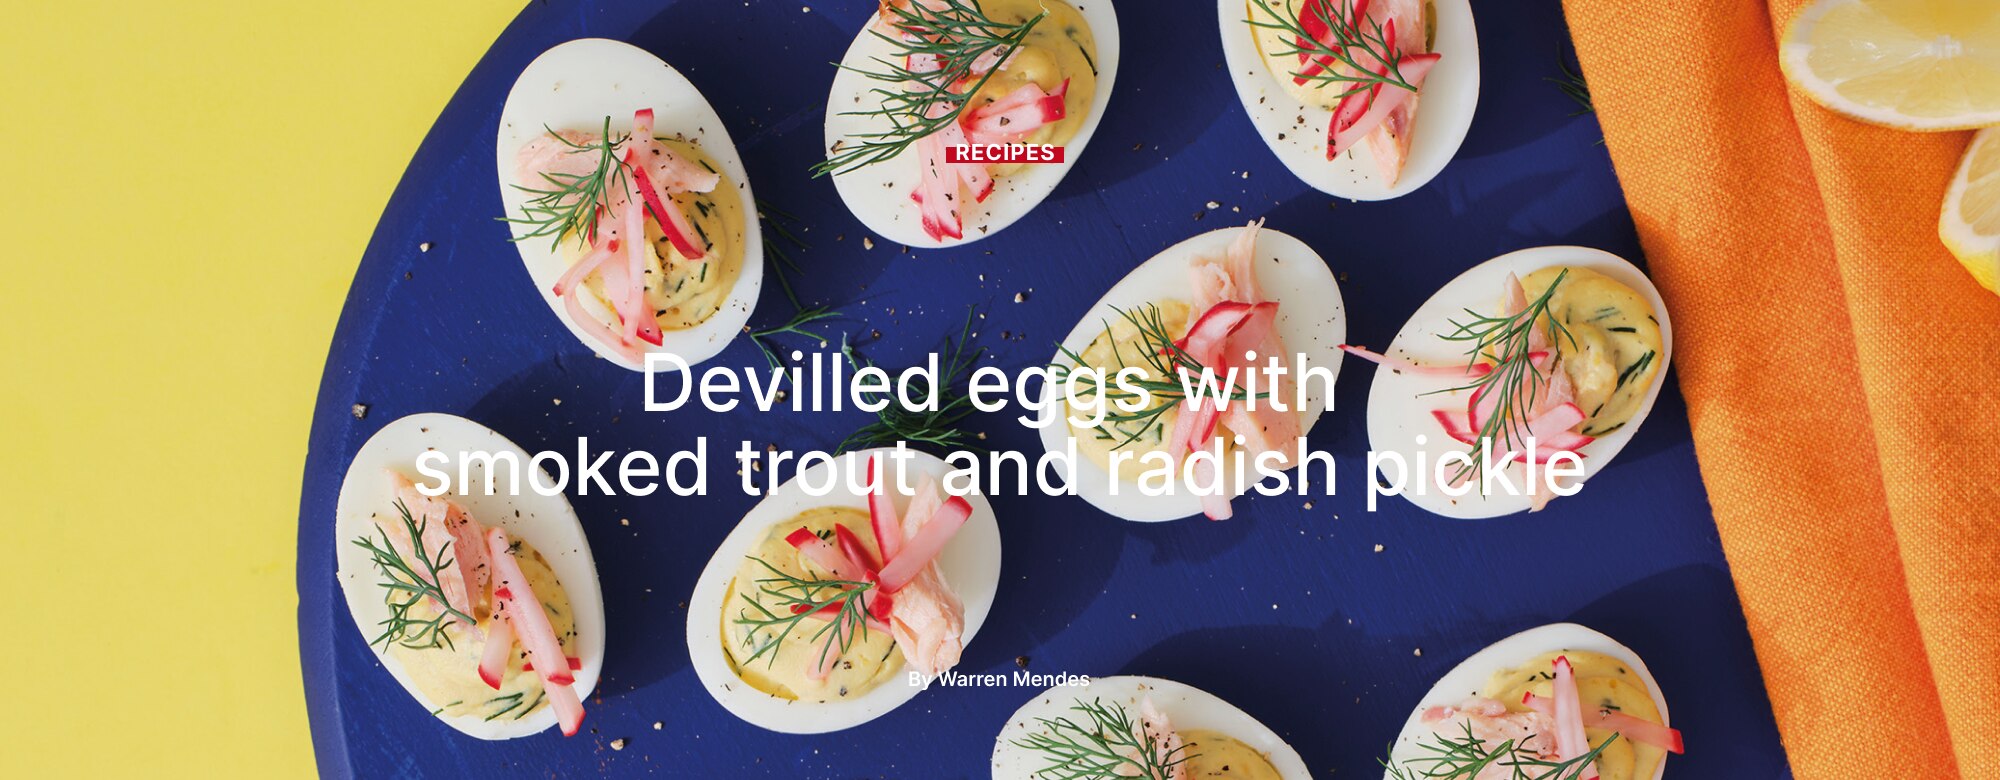 Devilled eggs with
smoked trout and radish pickle